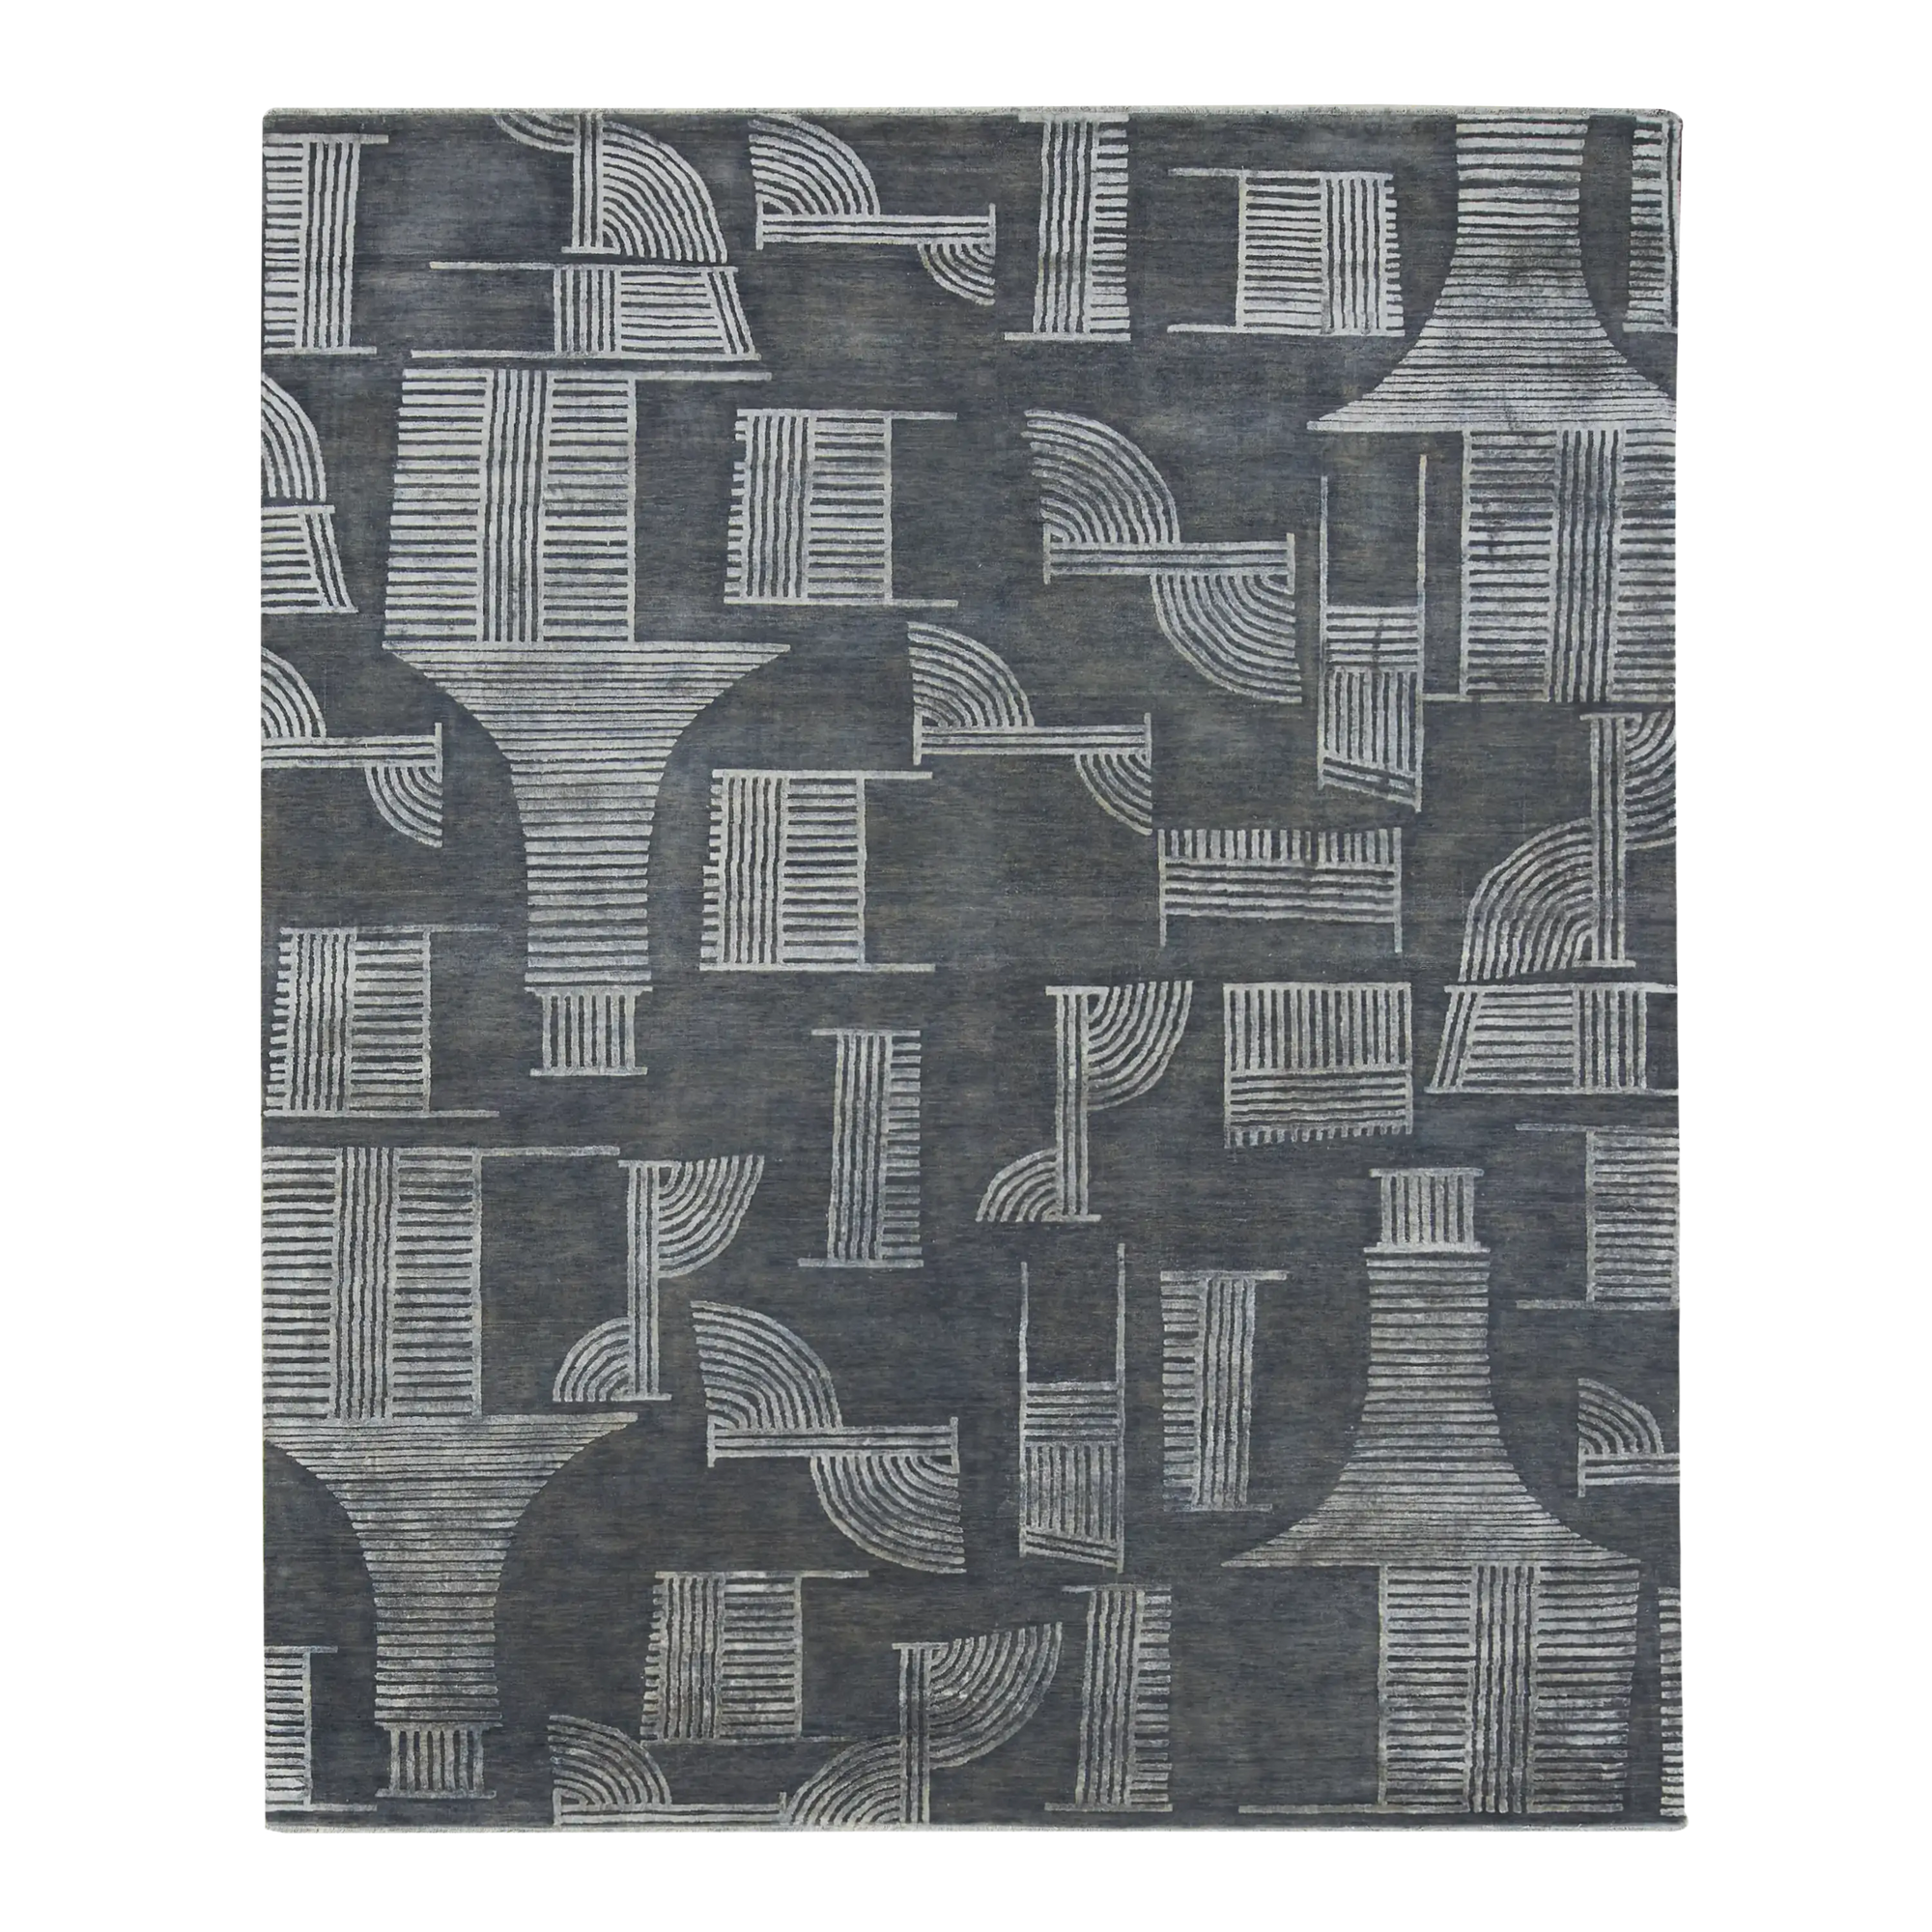 The Vienna Werkstätte Rug Collection honours the early 20th century alliance of artists and designers, known as Wiener Werkstätte, who sought to eliminate the boundary between cr